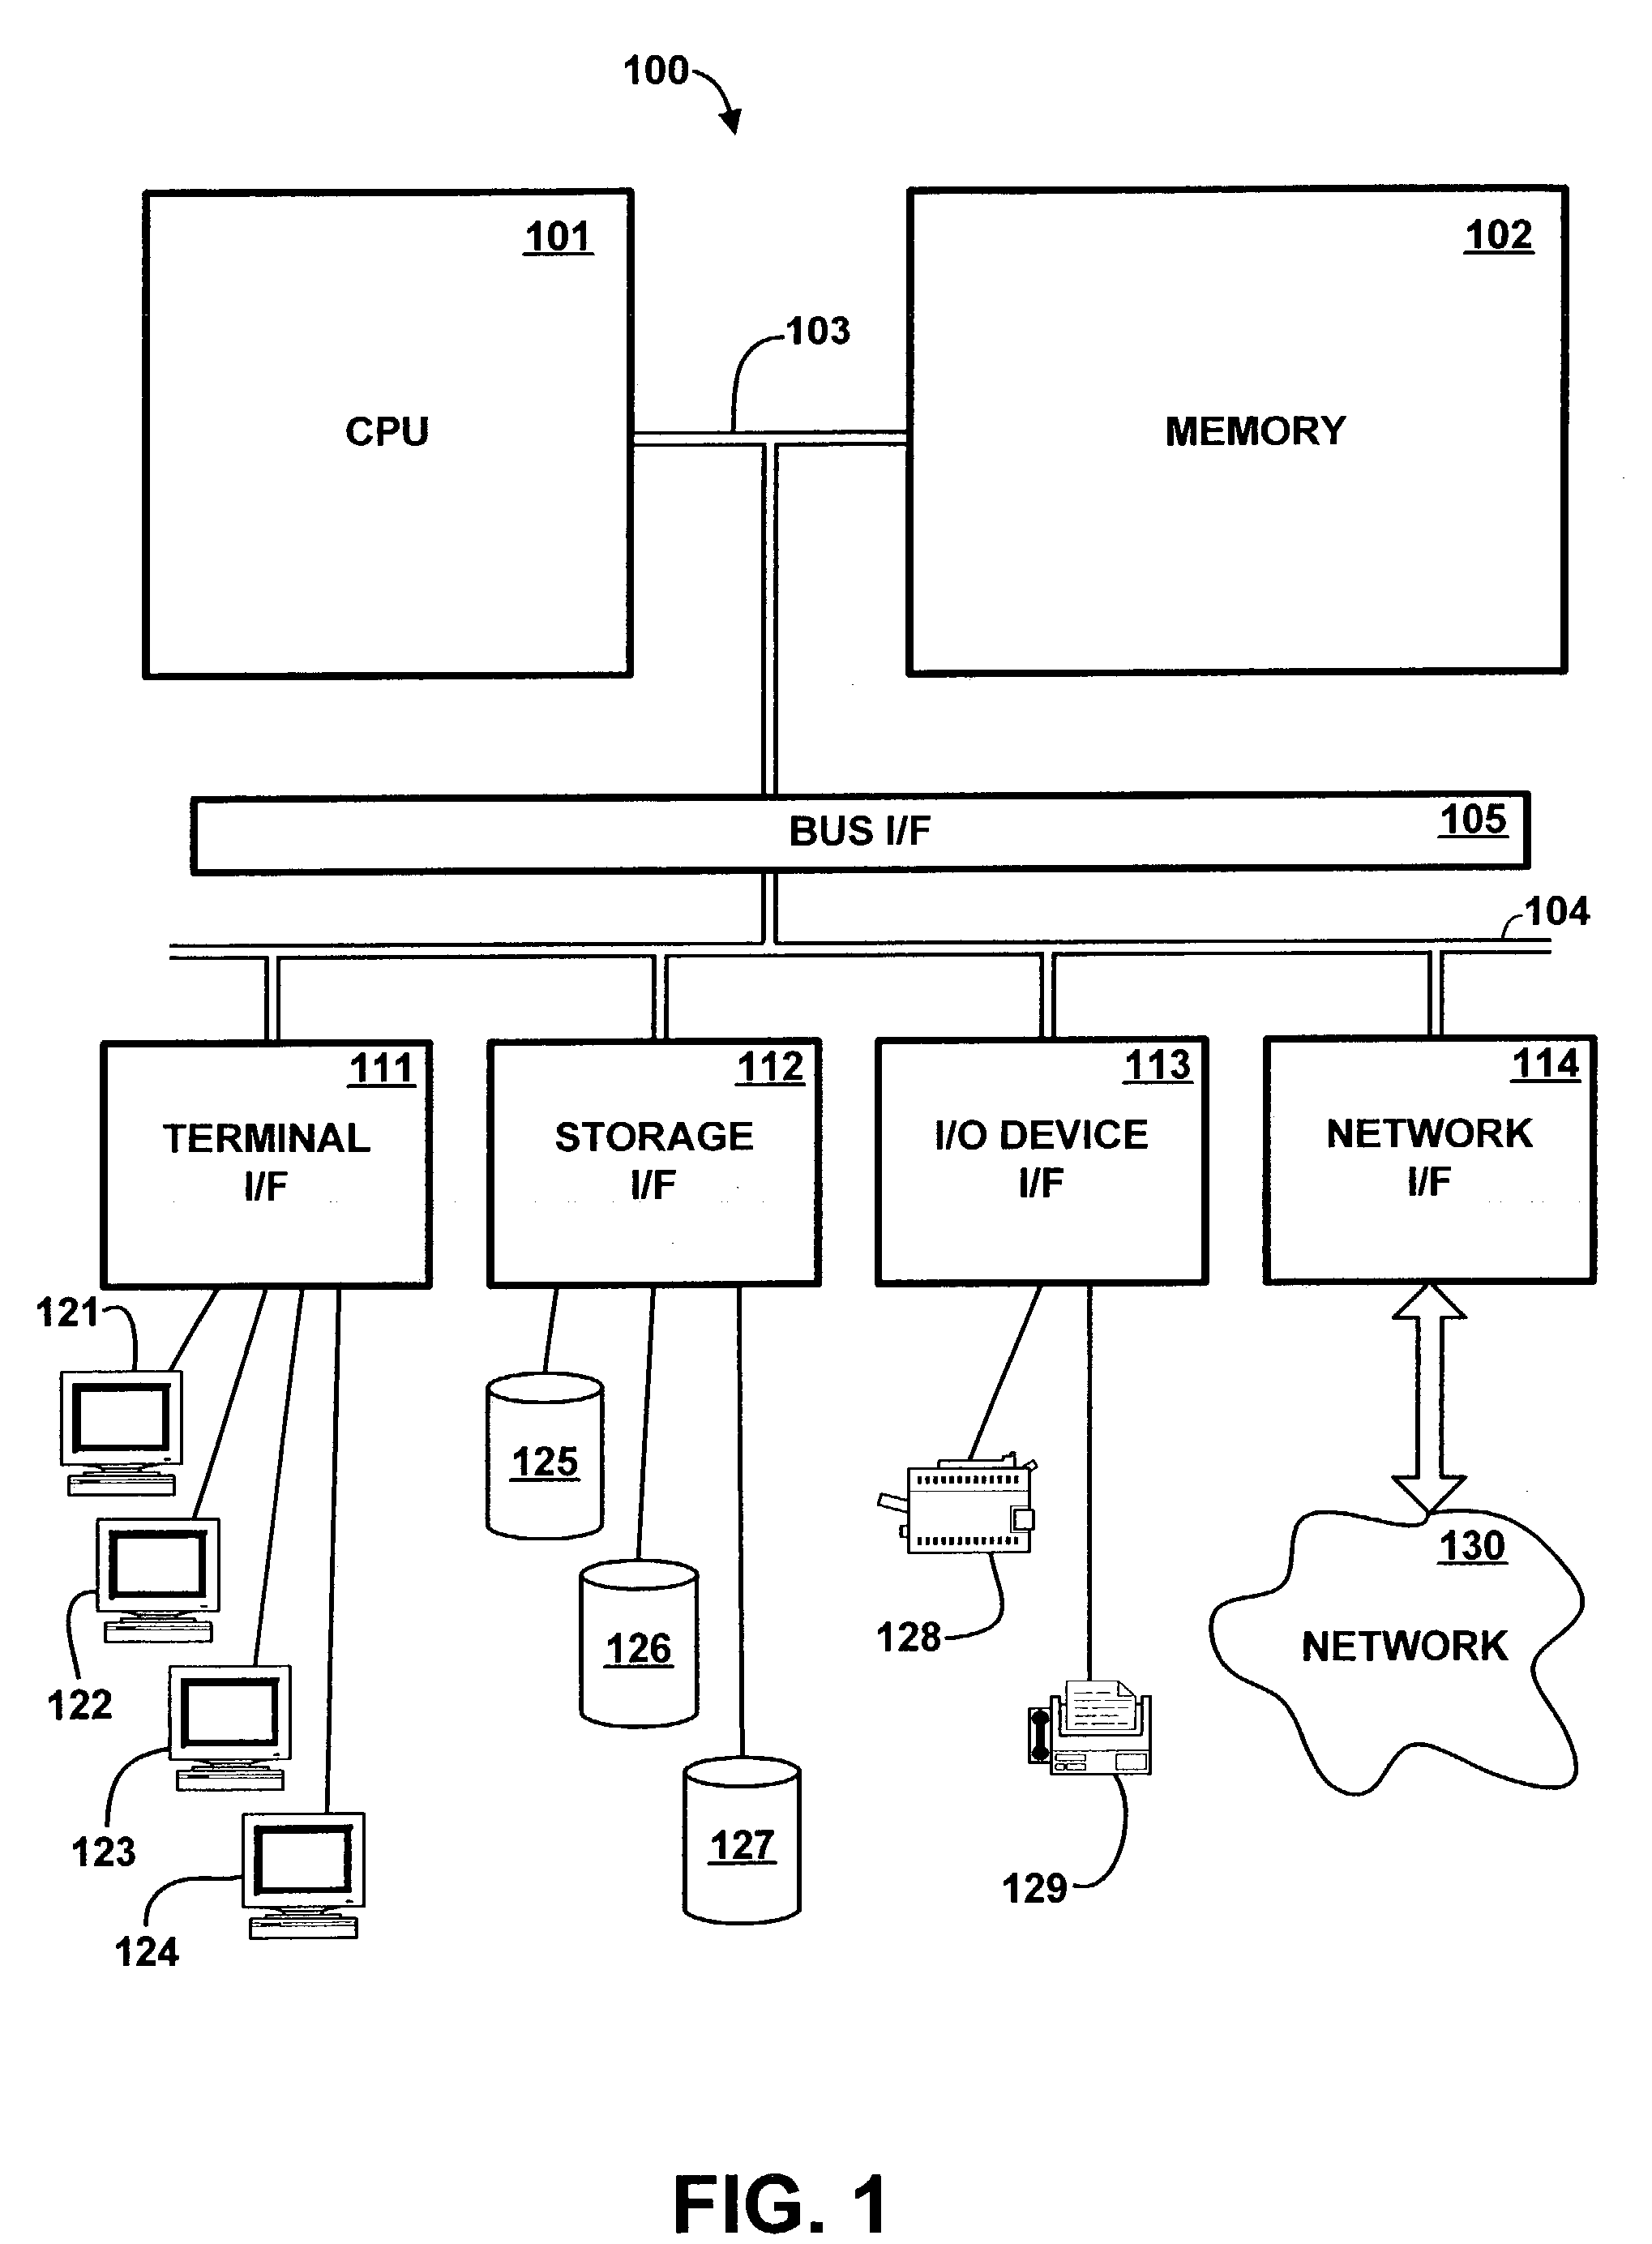 Method and apparatus for resolving memory allocation trace data in a computer system